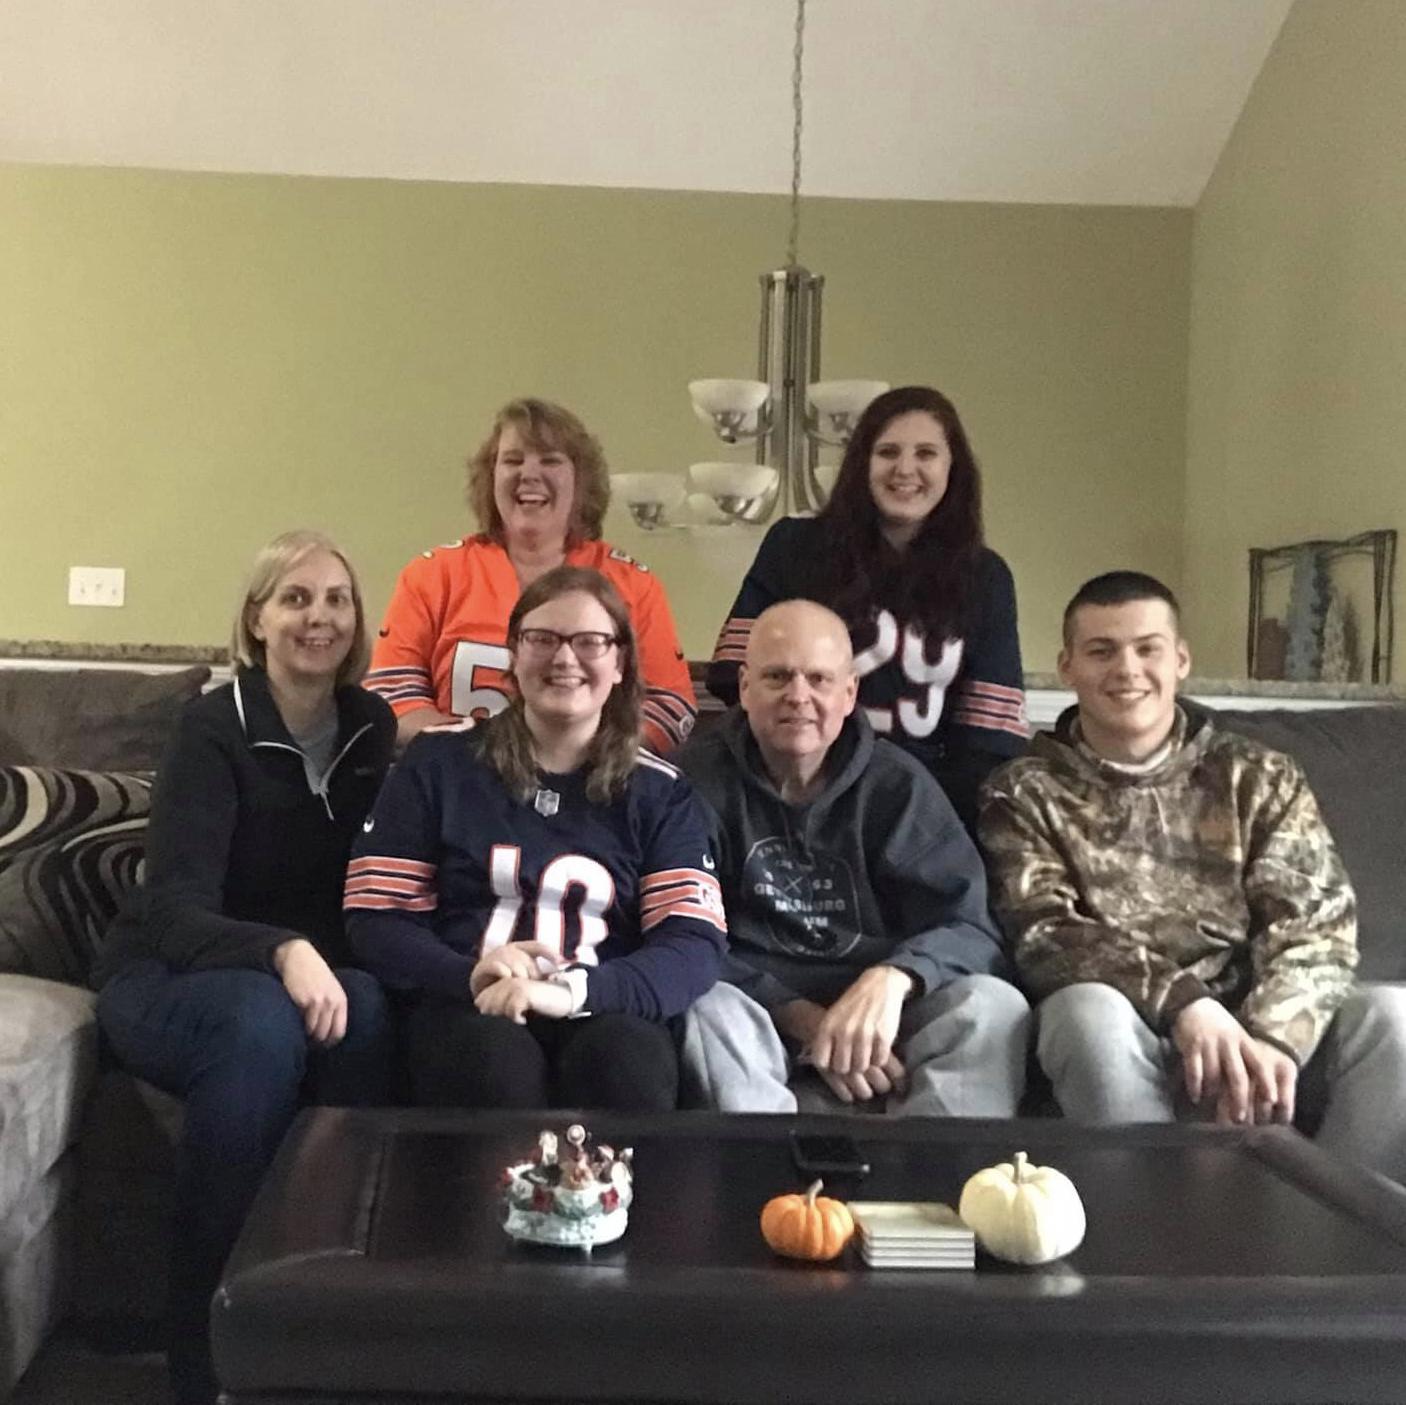 We are a Chicago Bears Household